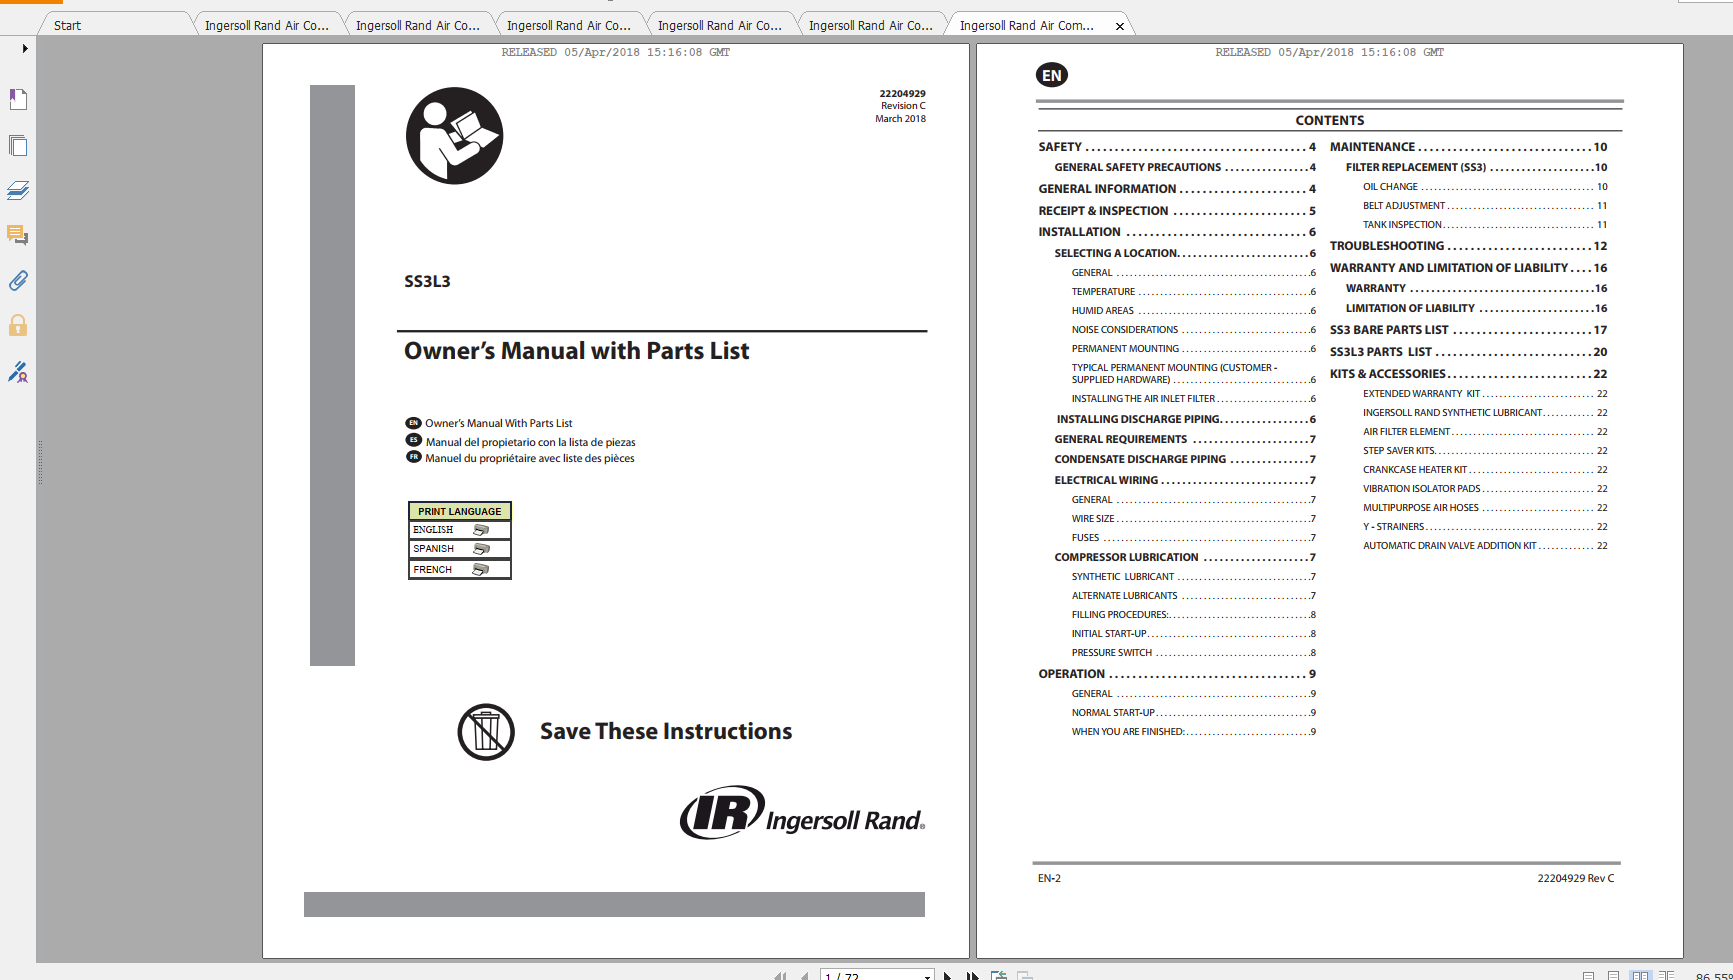 Ingersoll Rand Air Compressor Owner Manual with Parts List Collection |  Auto Repair Manual Forum - Heavy Equipment Forums - Download Repair   Workshop Manual